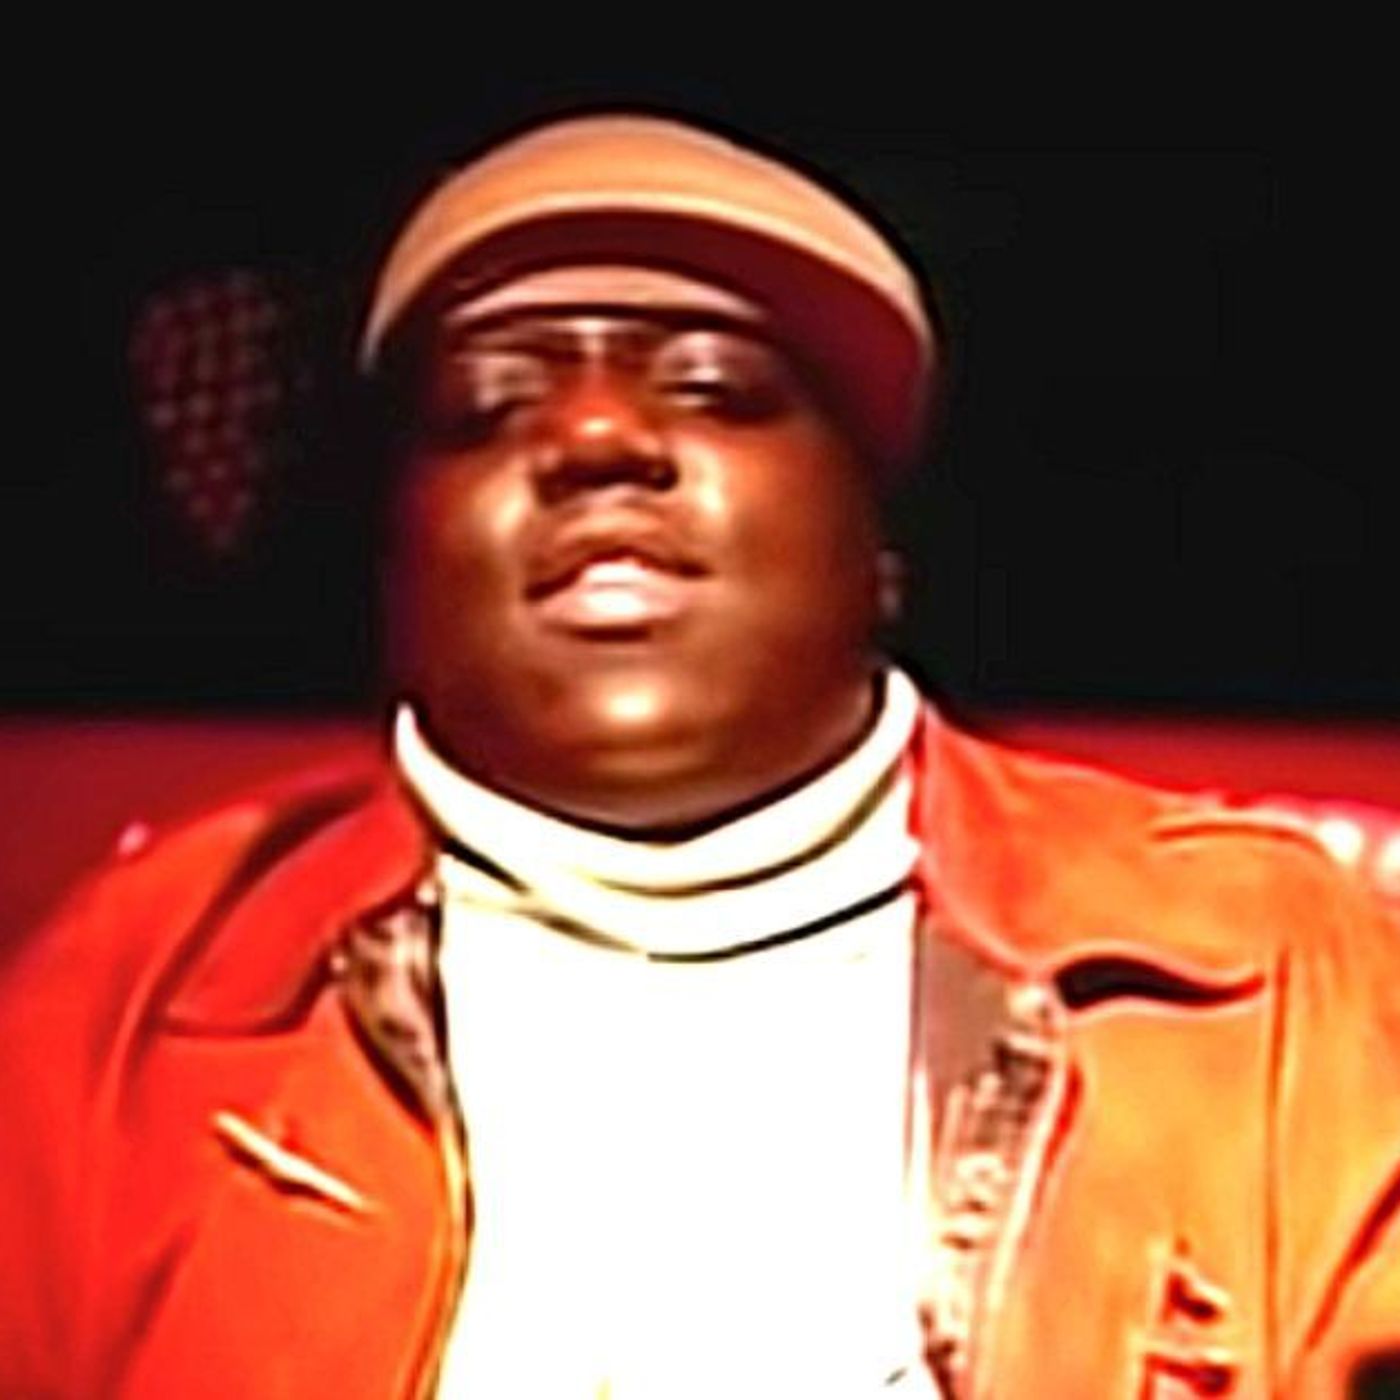 Rest in Peace - Notorious B.I.G.